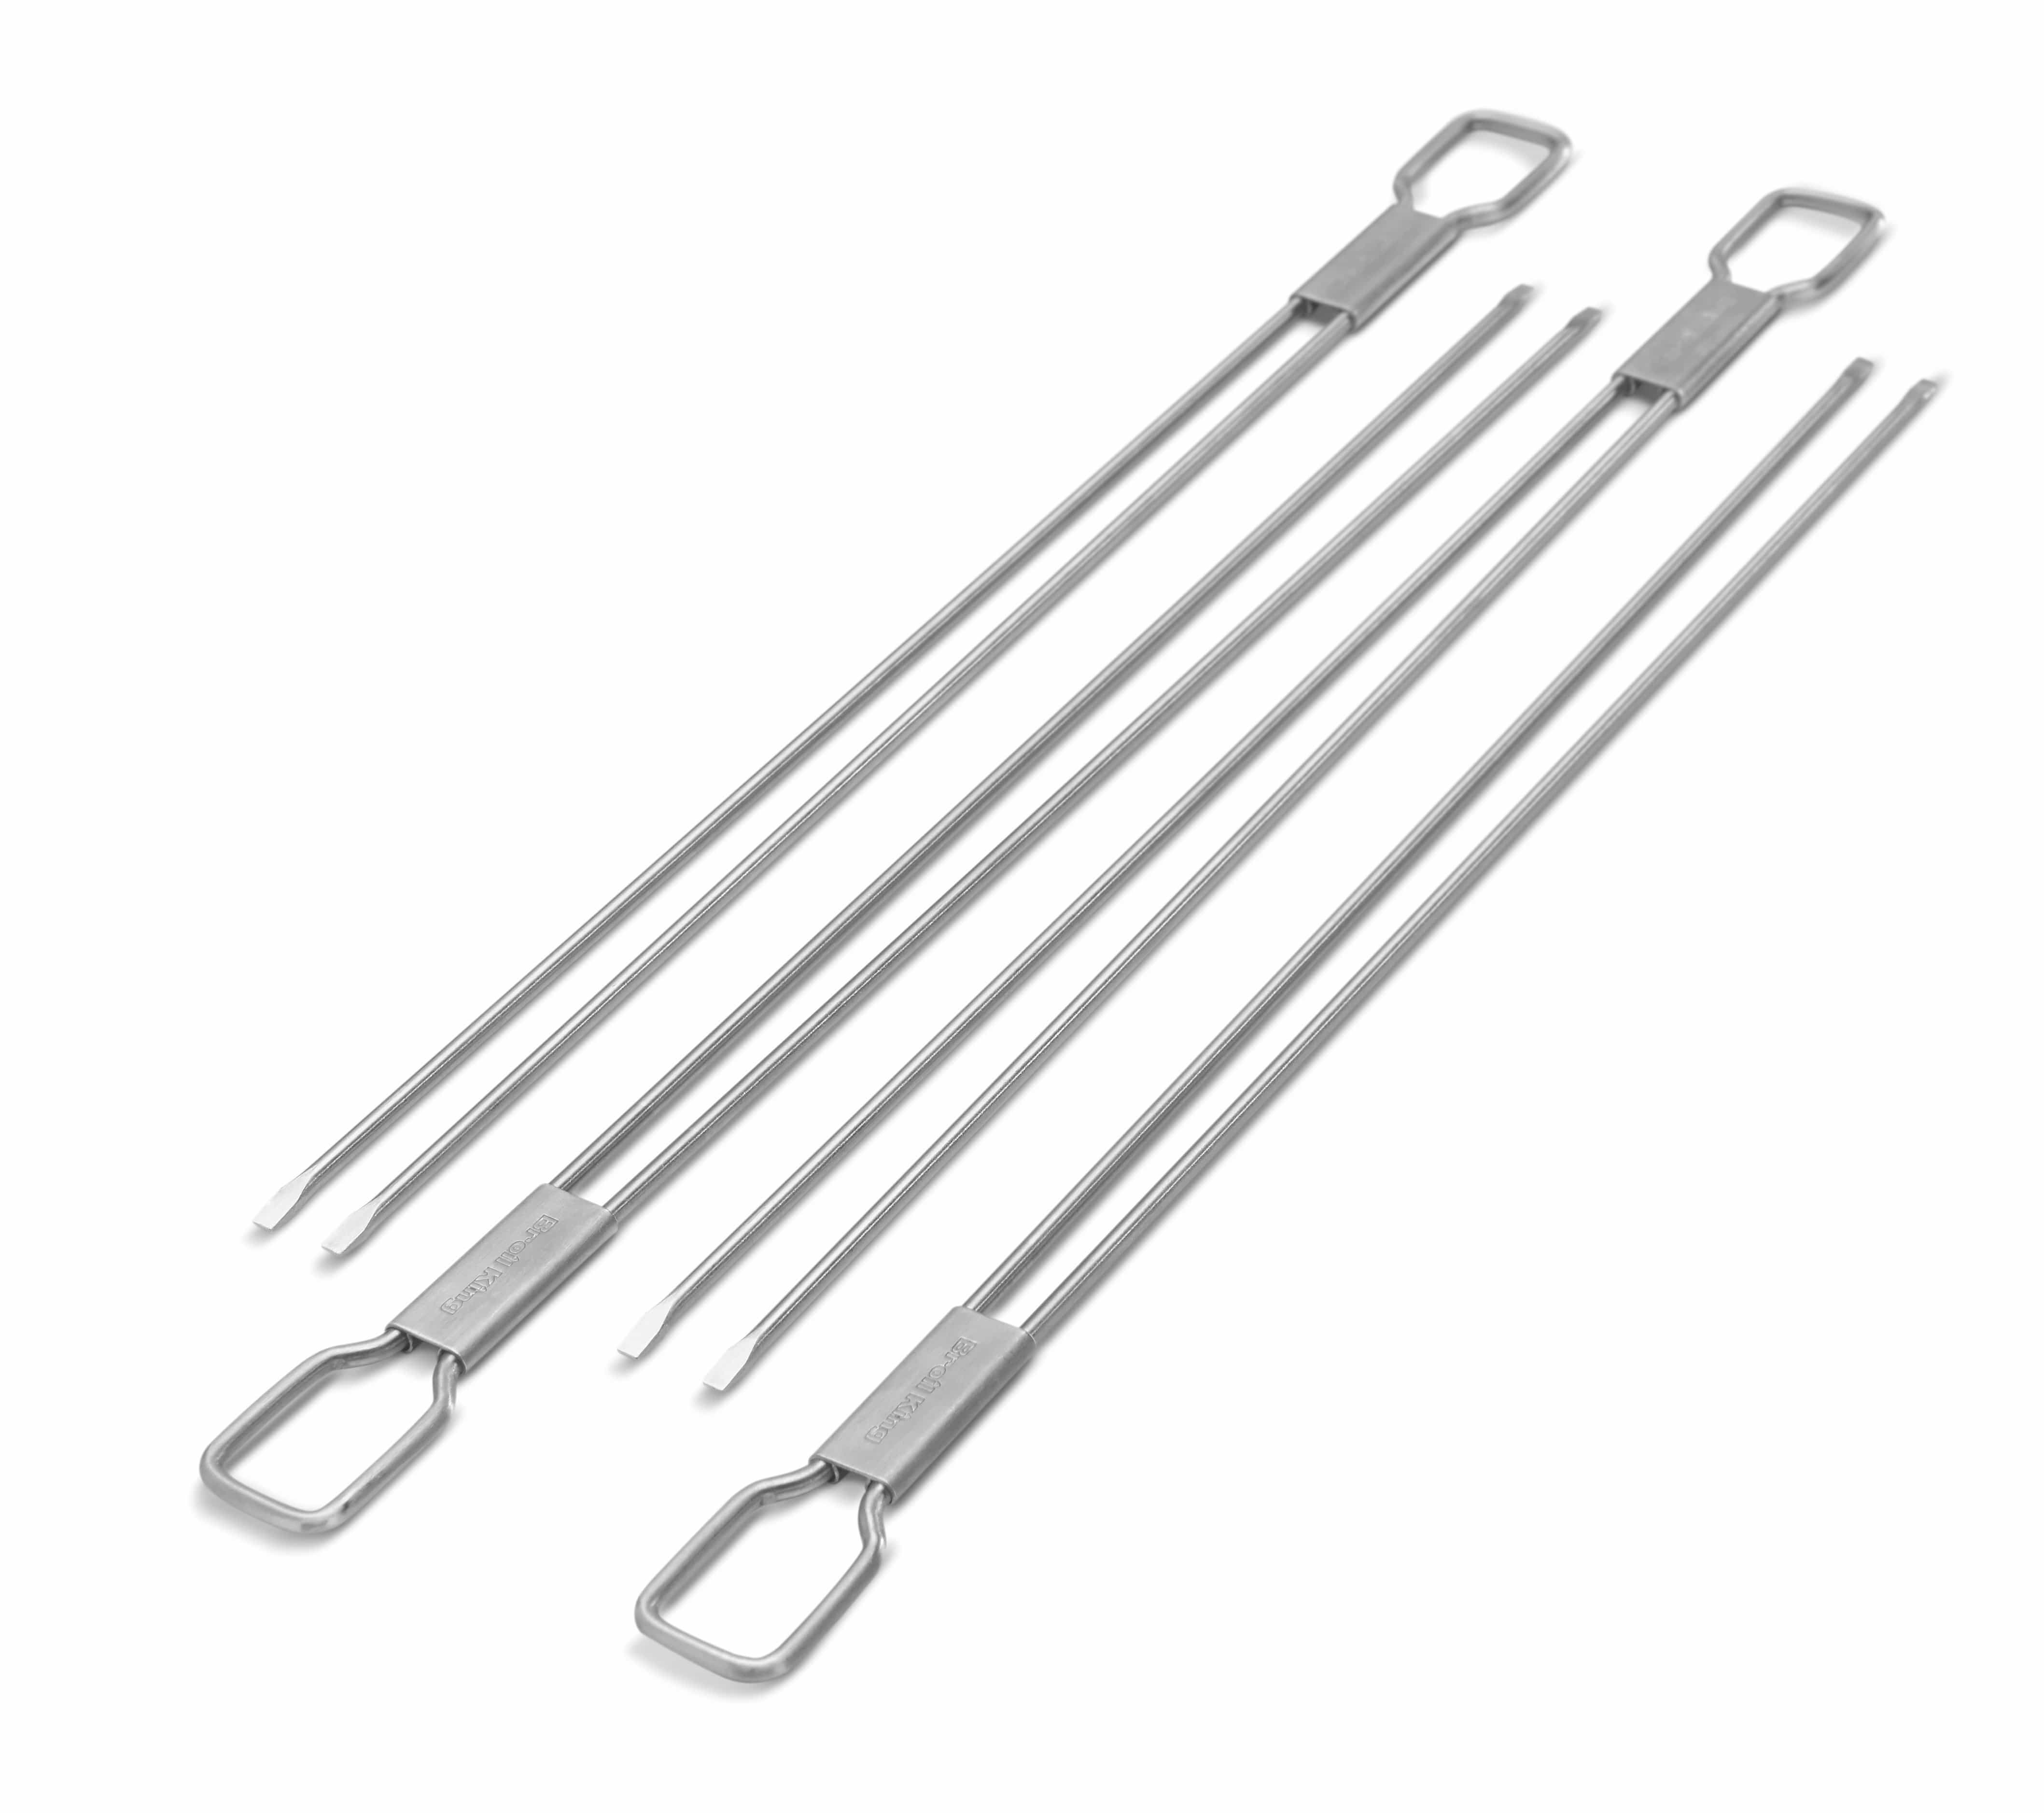 Broil King Broil King Accessories SKEWERS - DUAL PRONG - 4 PCS - SS